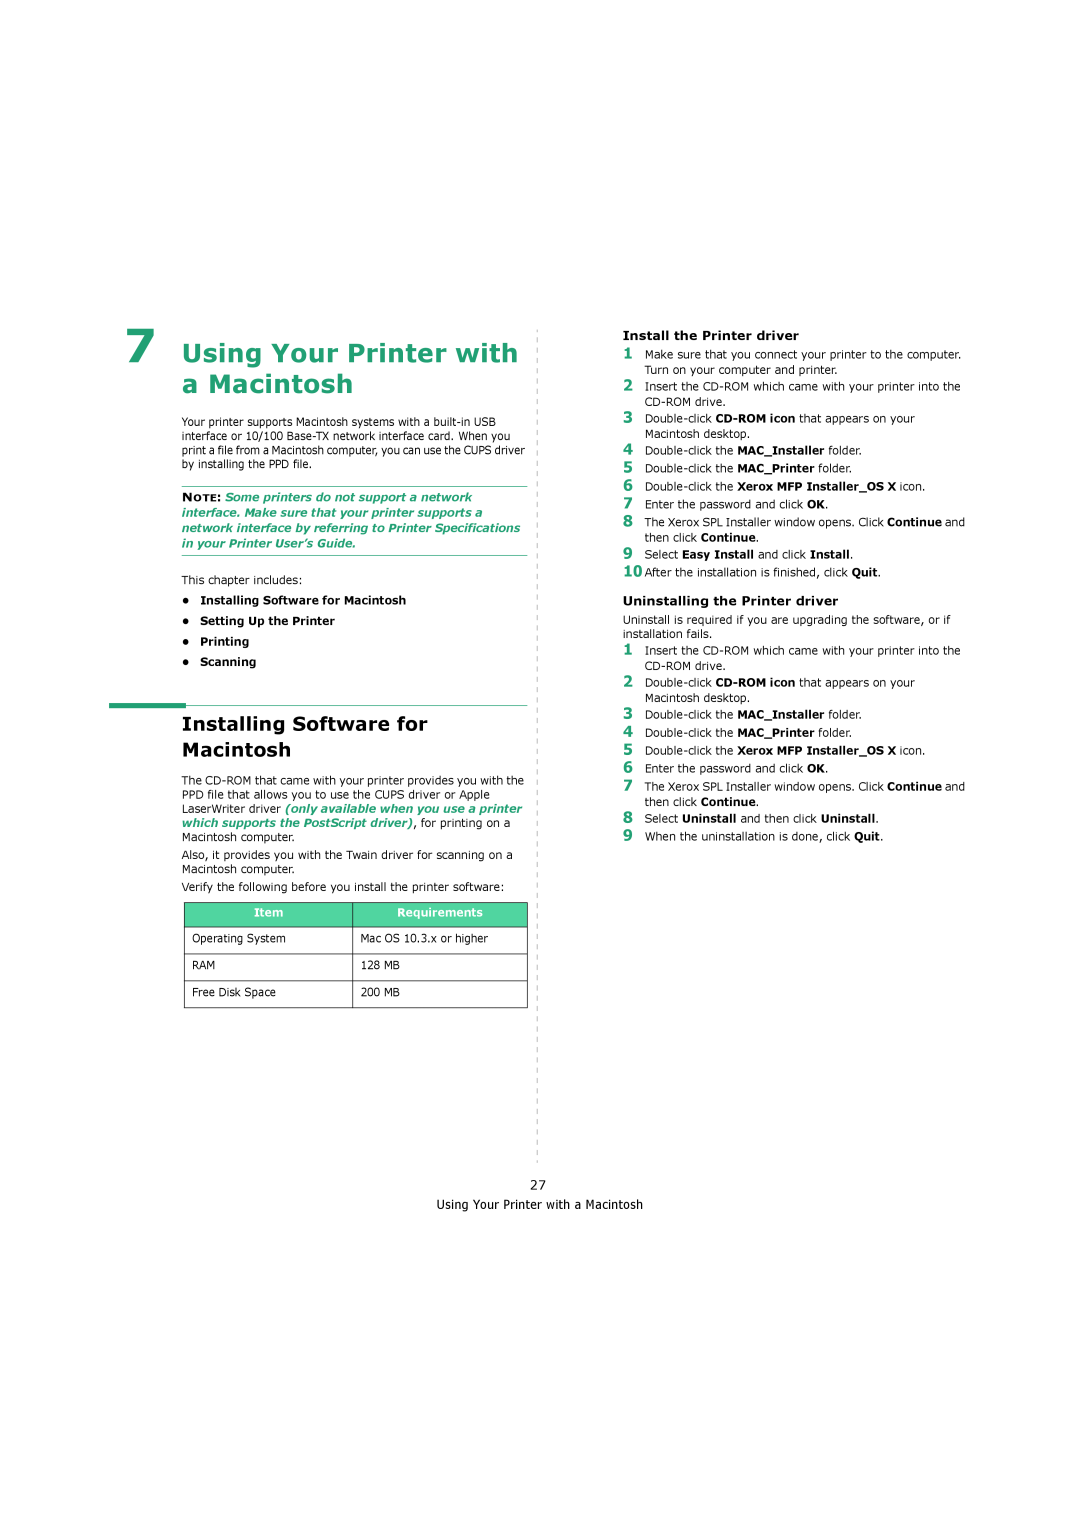 Xerox 3119 manual Using Your Printer with a Macintosh, •Installing Software for Macintosh 